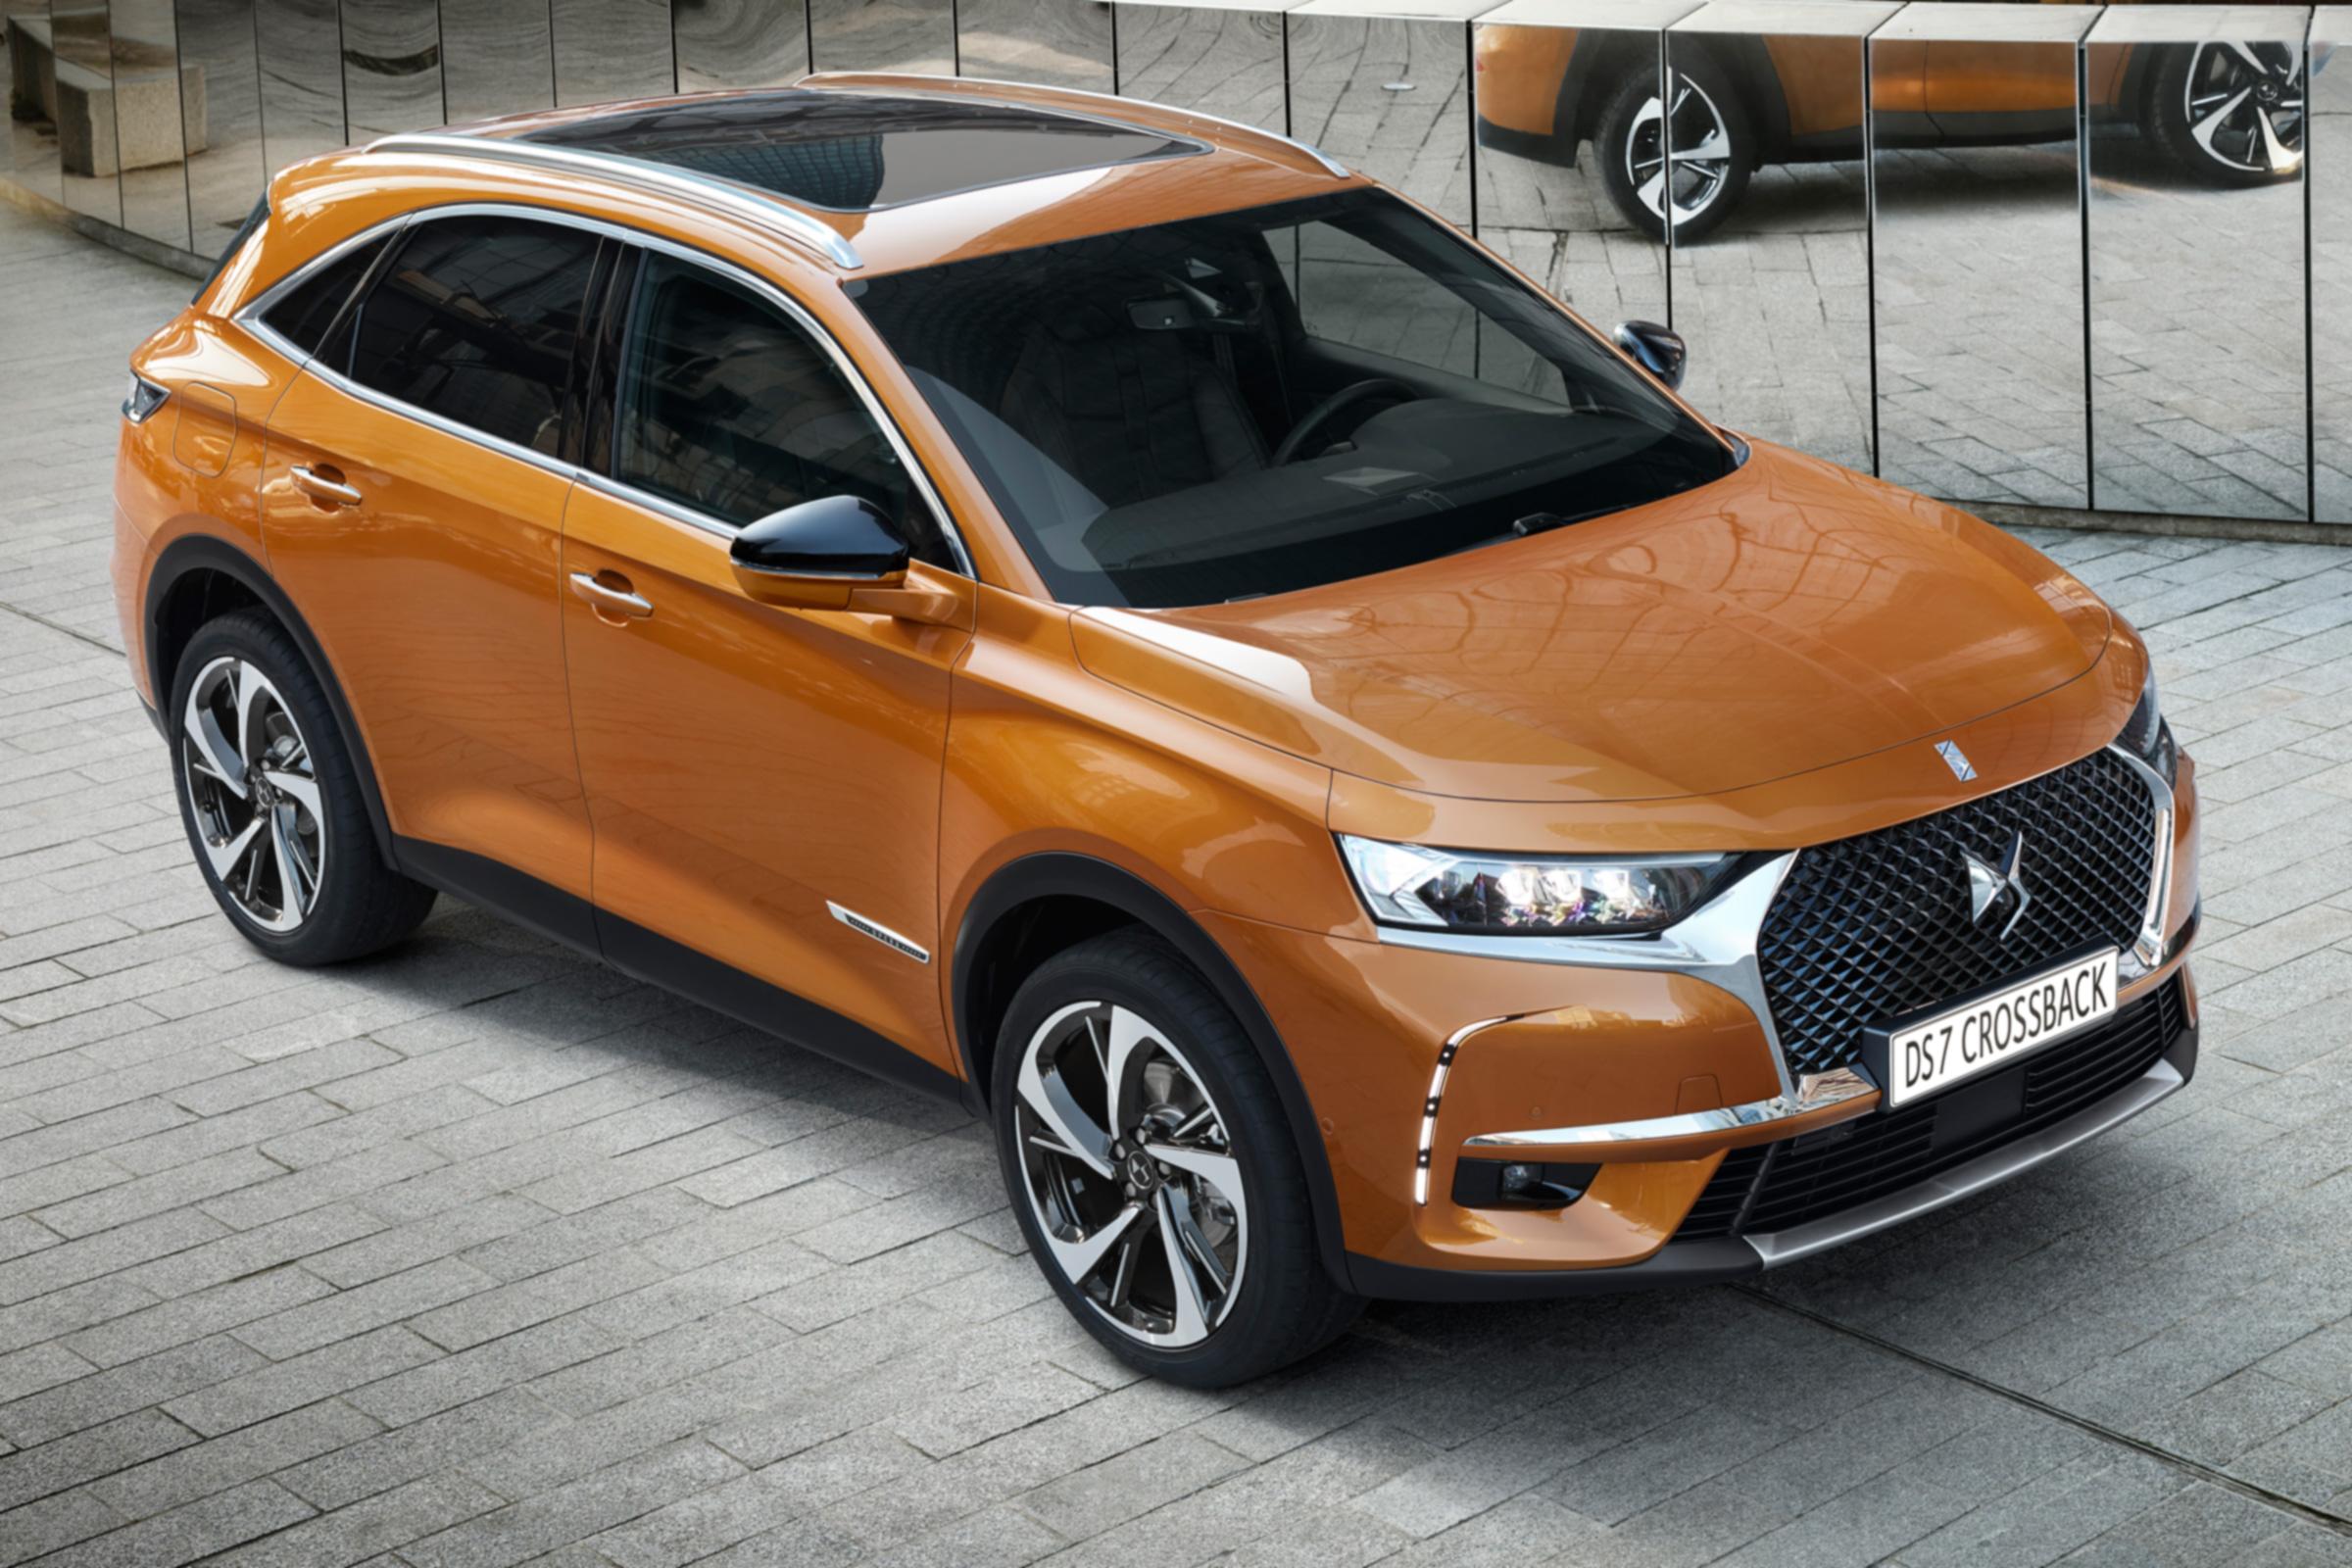 New DS Crossback SUV full details, prices and pics